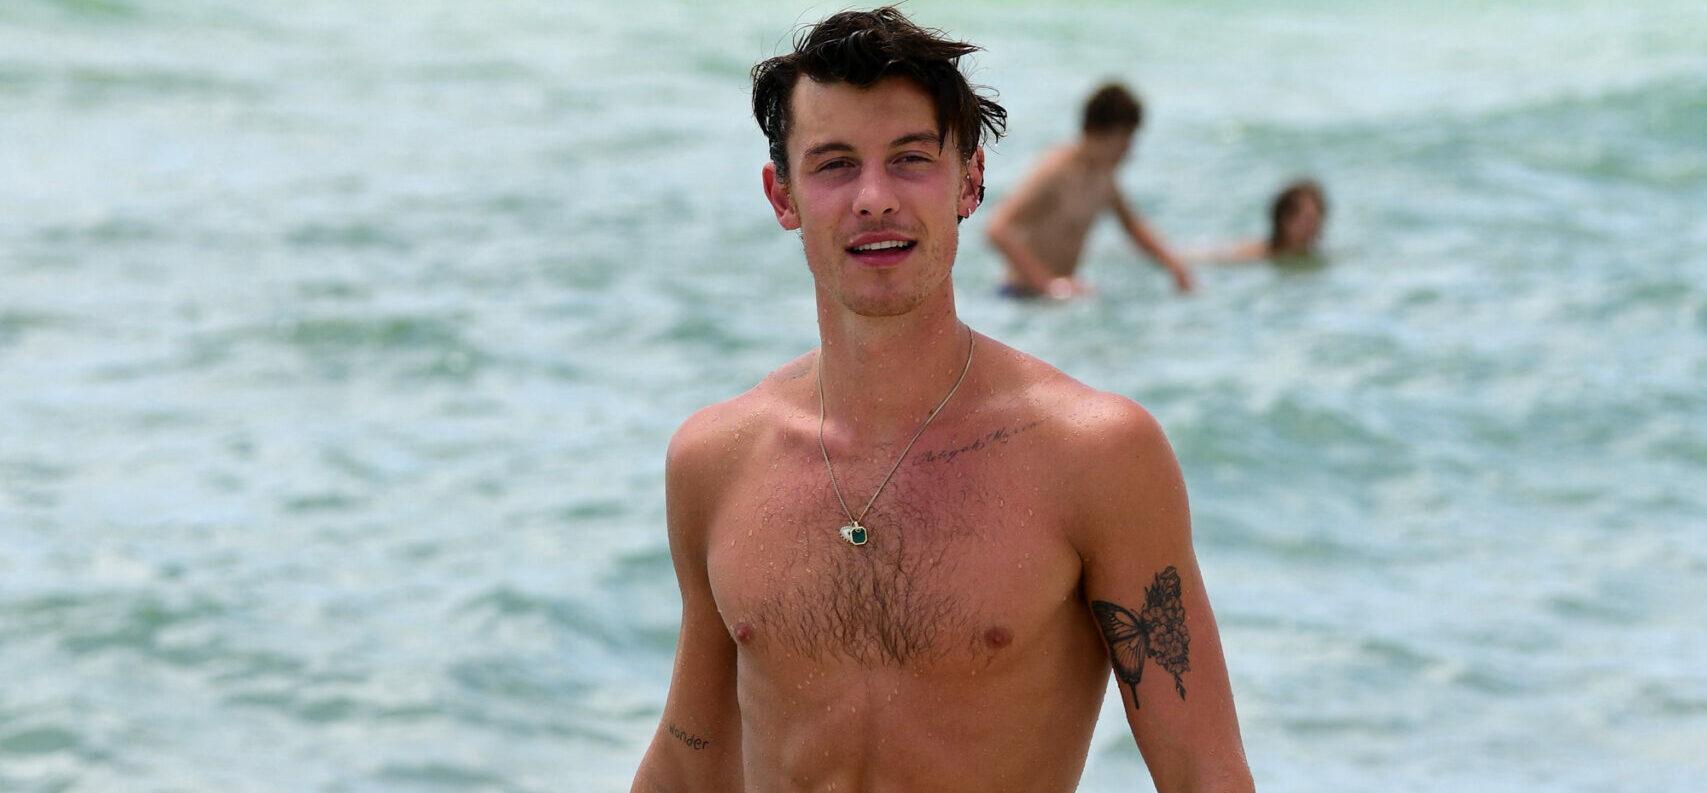 Shirtless Shawn Mendes looks happy as he has fun on the beach on his birthday in Miami